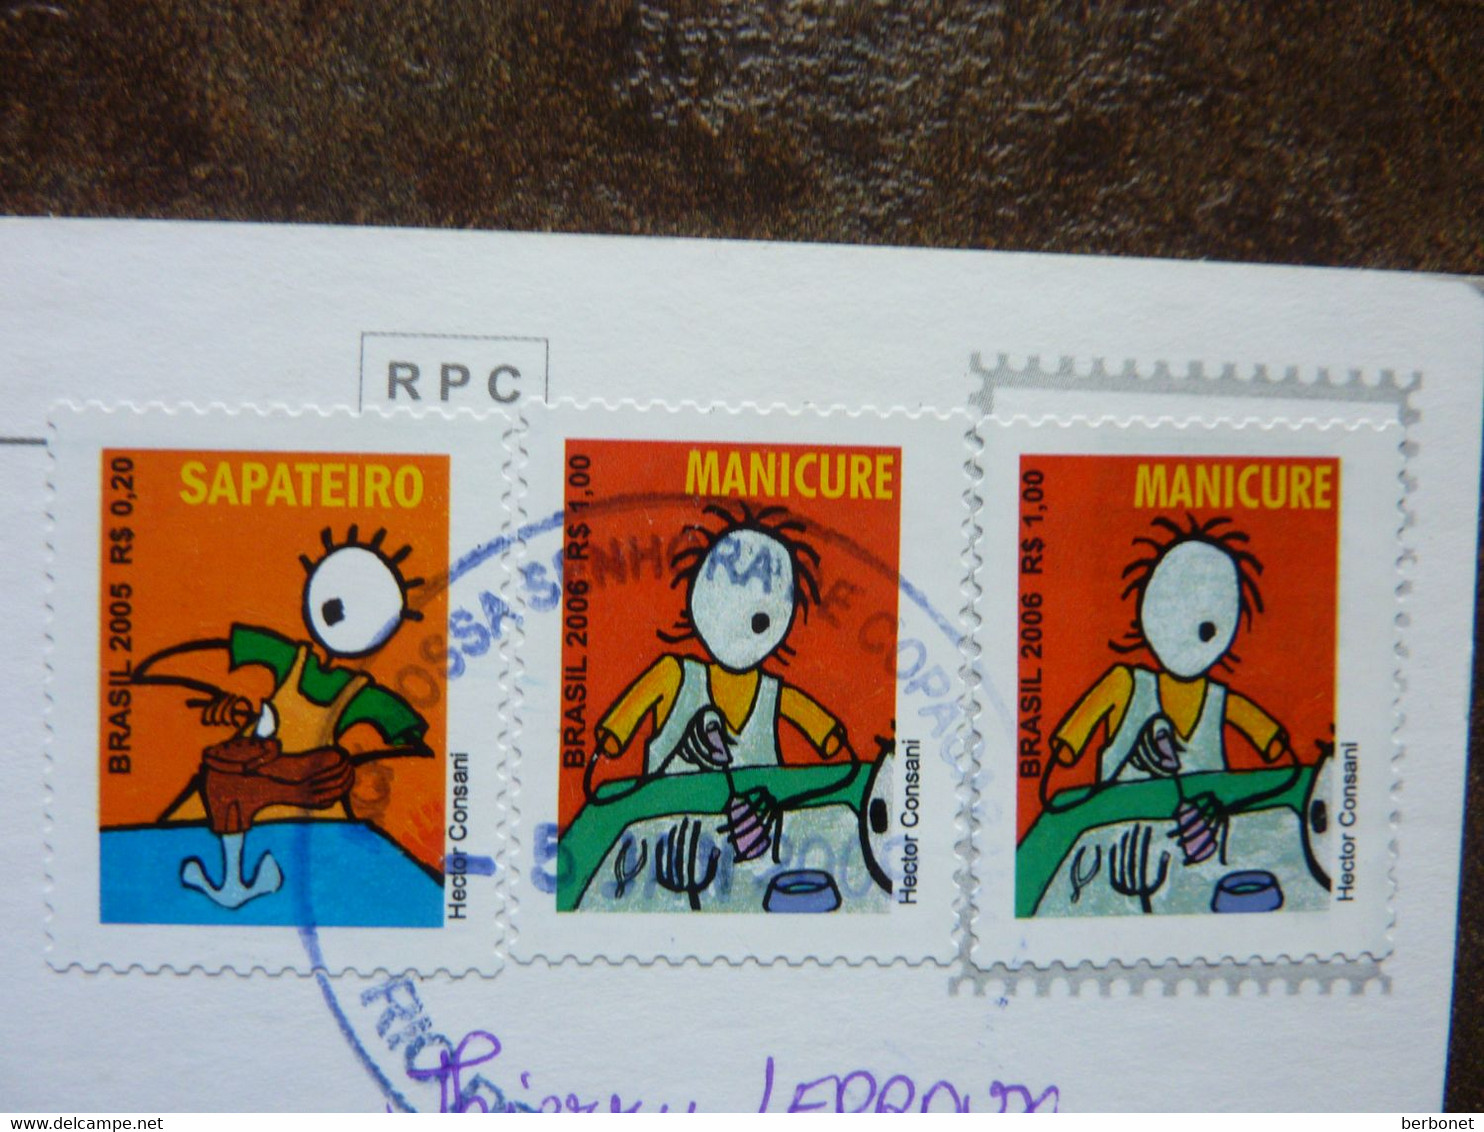 2005   3 Stamps On A Post Card Used - Oblitérés